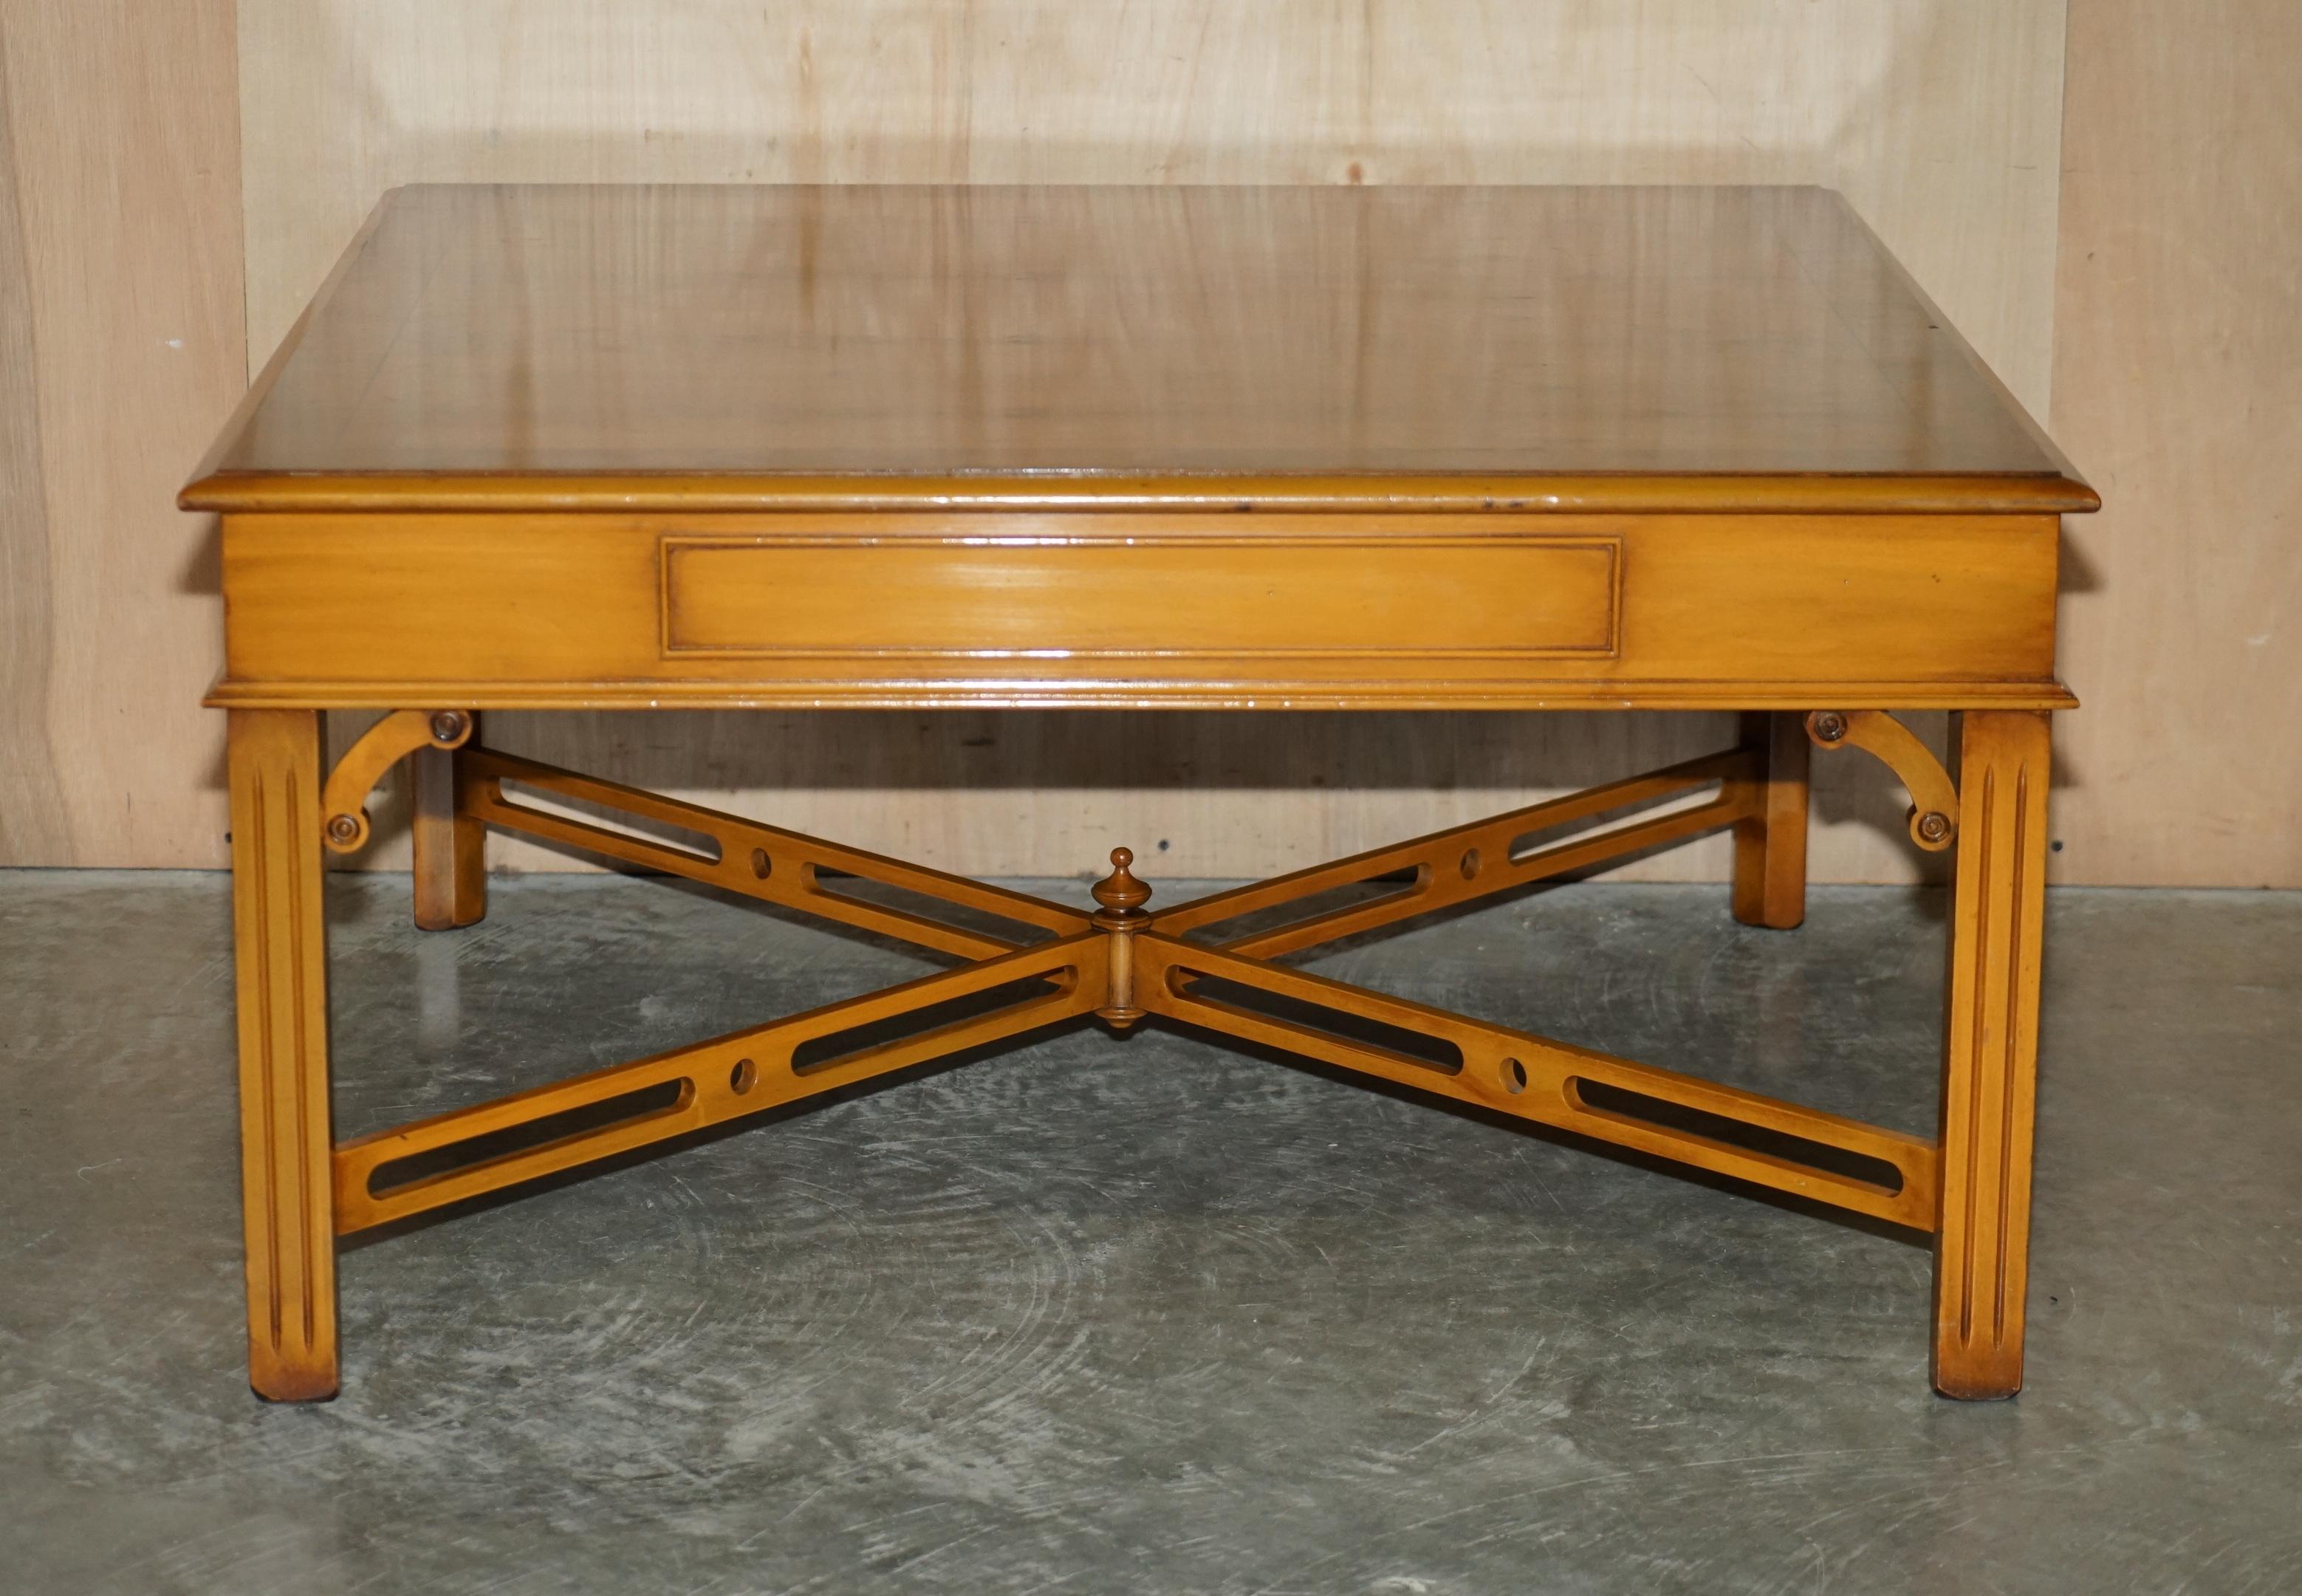 LOVELY BURR YEW WOOD TABLE COFFEE TABLE WiTH THOMAS CHIPPENDALE STRETCHES en vente 8